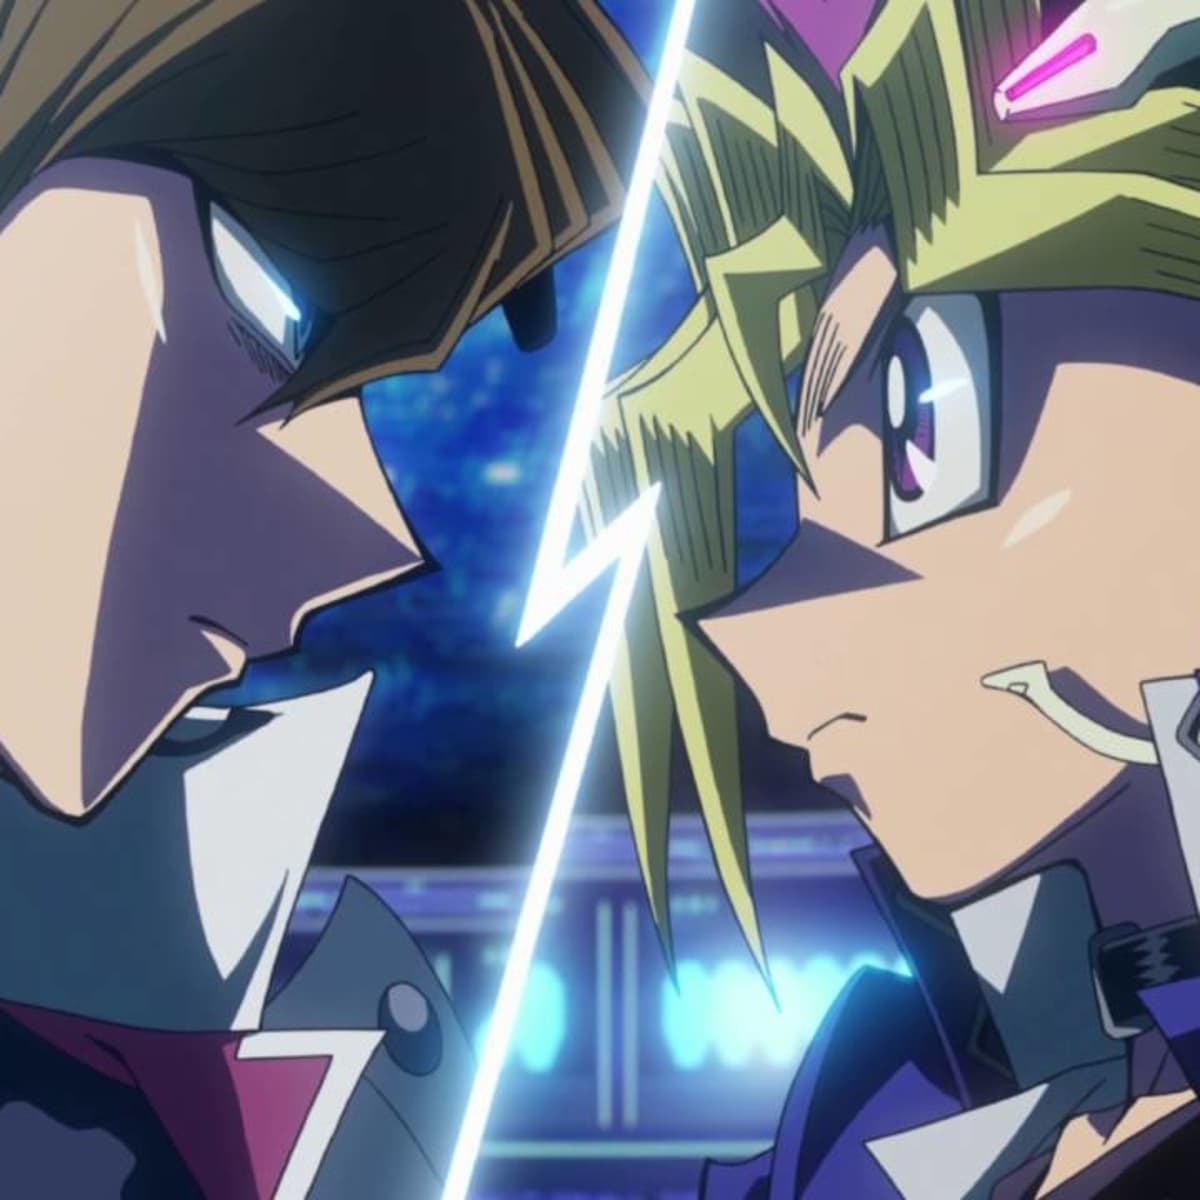 10 Reasons Why Kaiba Should Have Defeated Yugi in 